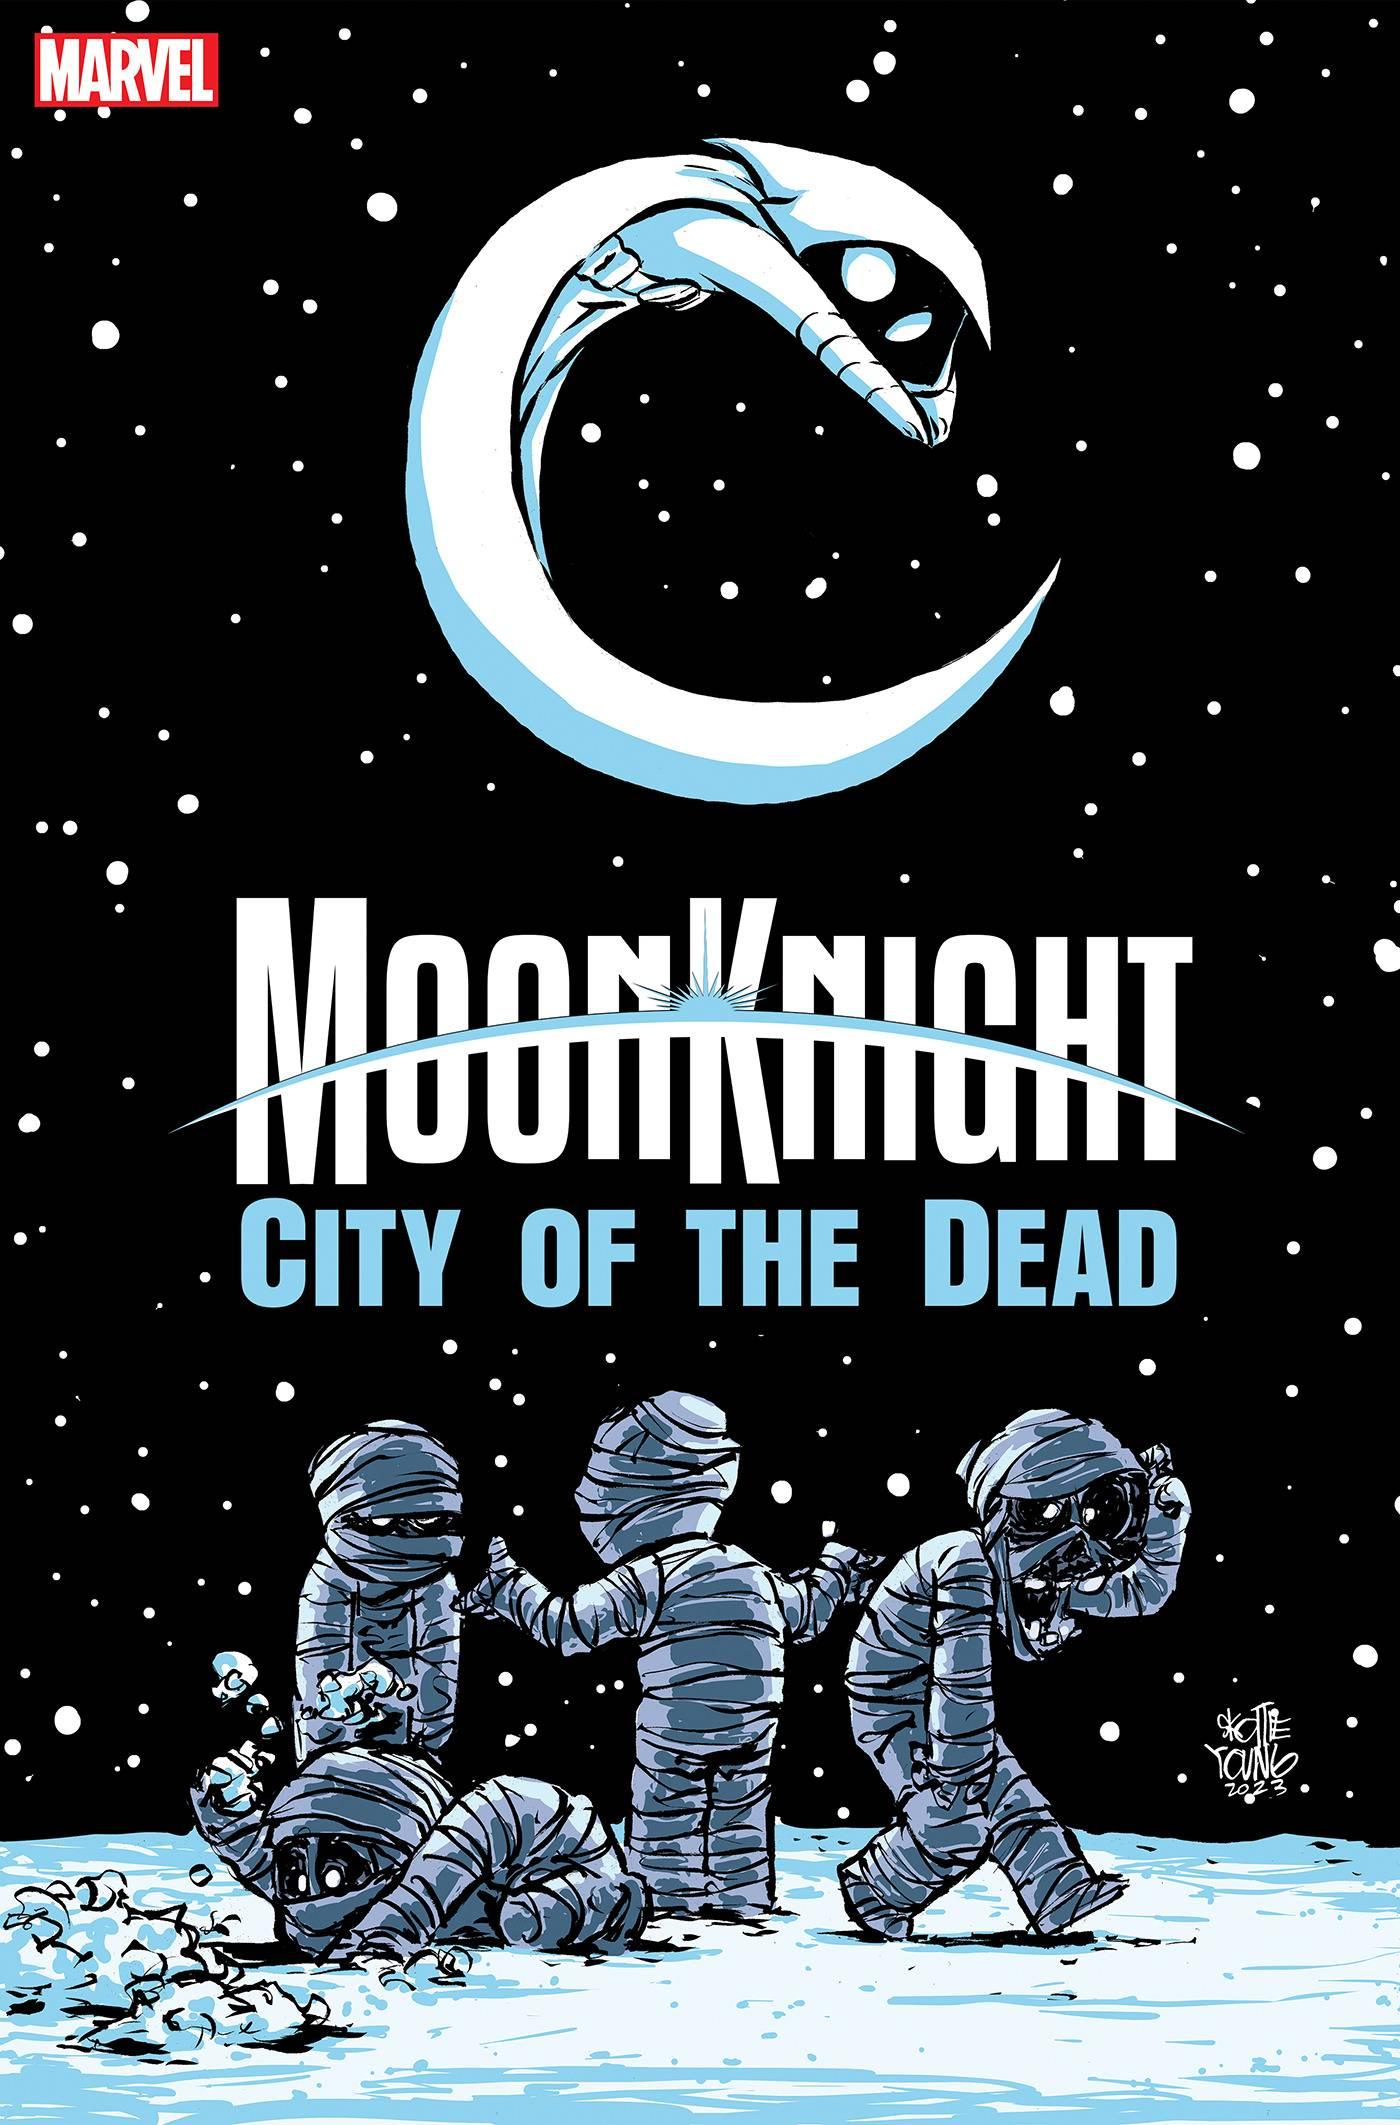 MOON KNIGHT CITY OF THE DEAD #1 SKOTTIE YOUNG VAR - HolyGrail Comix